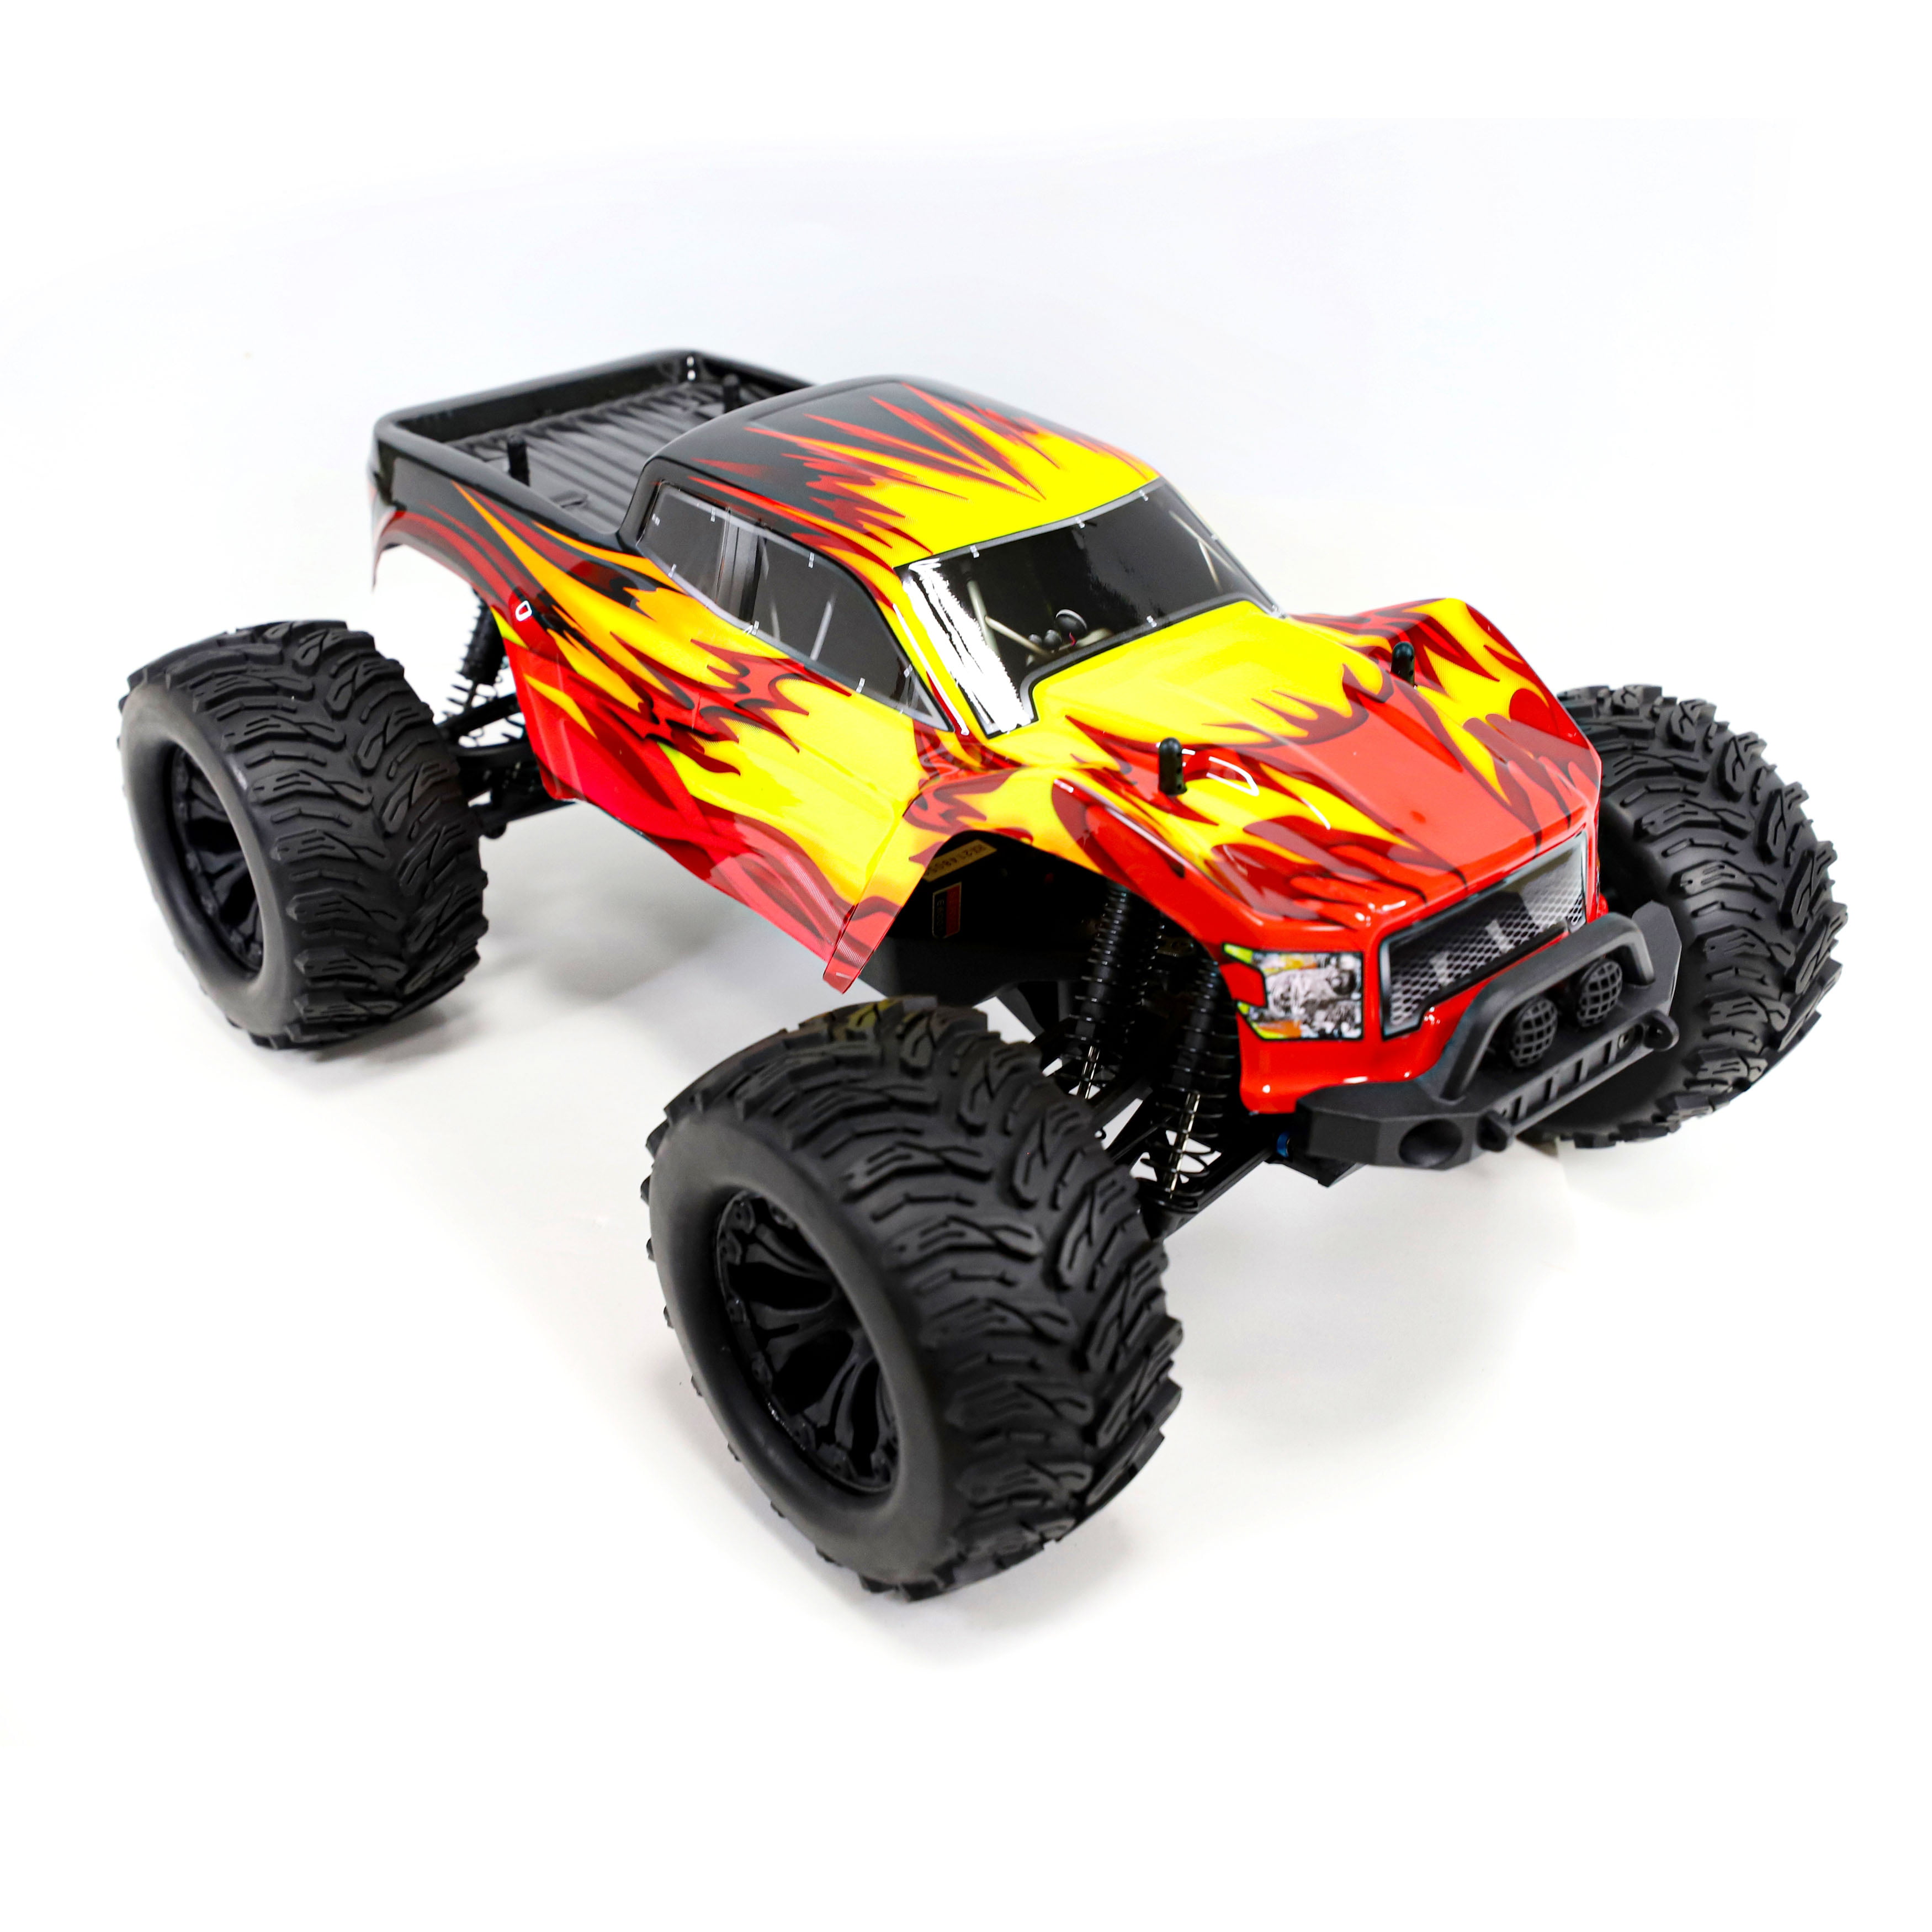 ALEKO RCCAR07 OffRoad 4WD Electric Powered RC Monster Truck 110